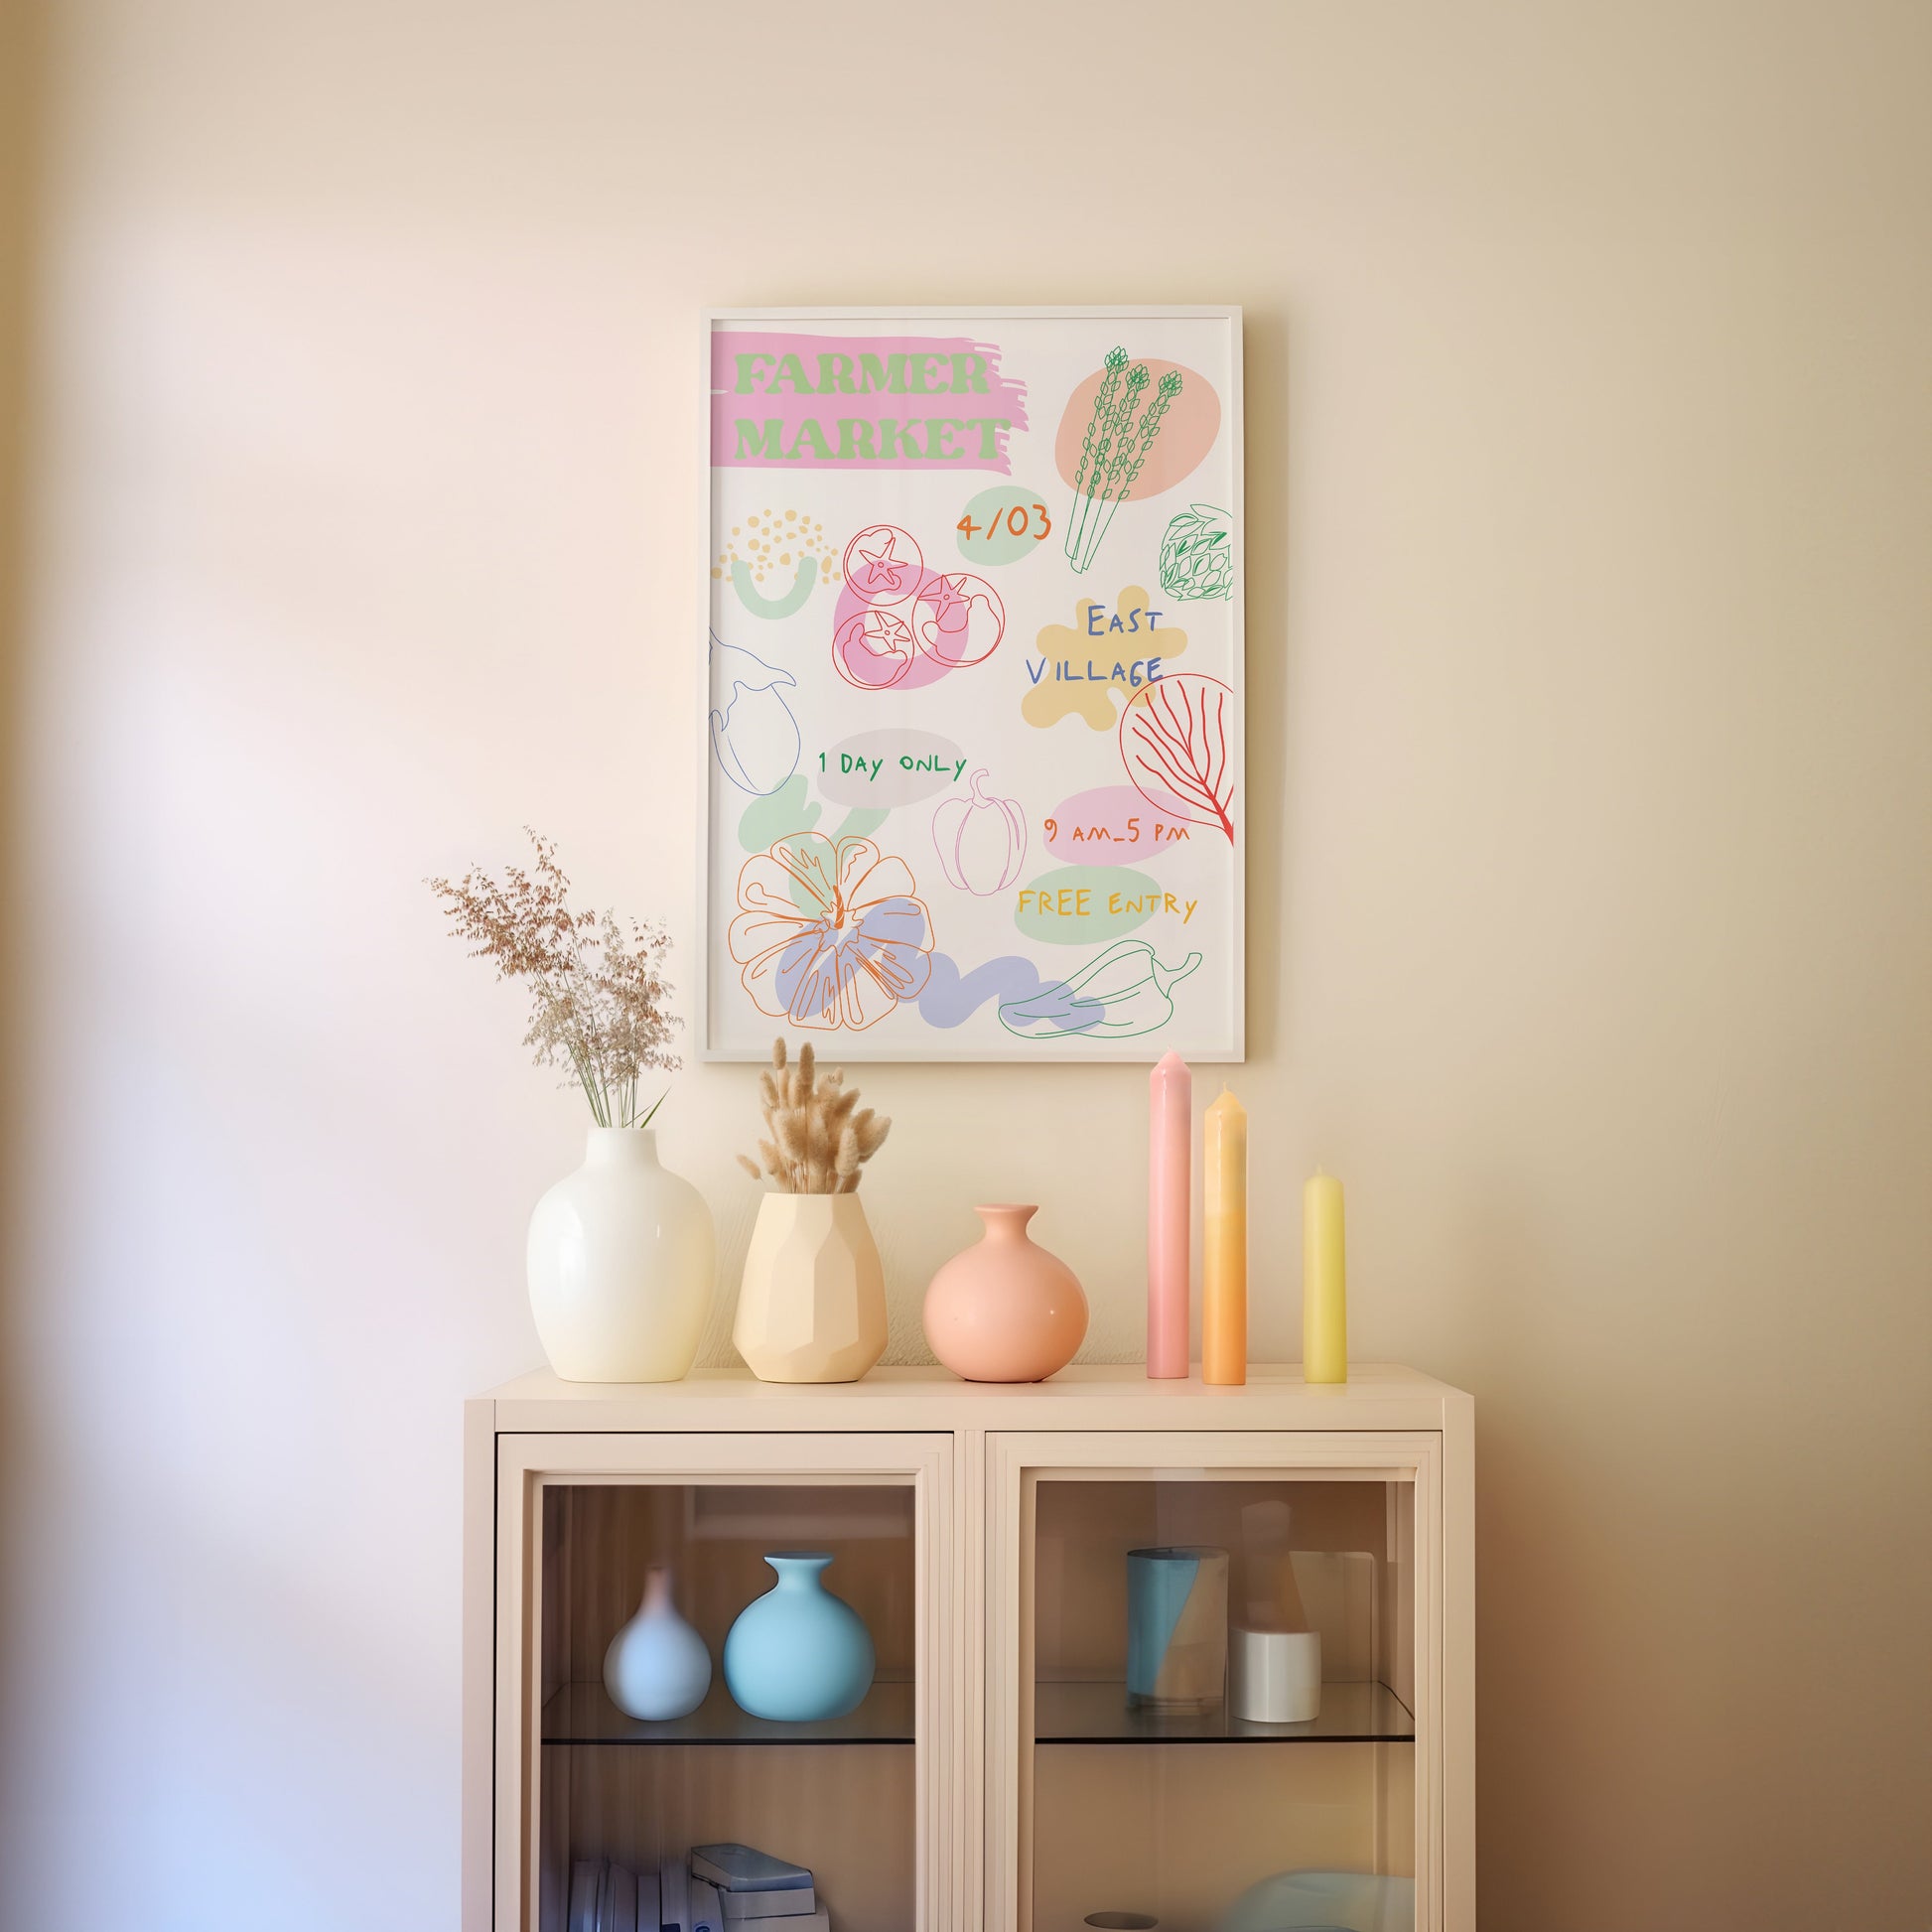 a shelf with vases and a poster on it